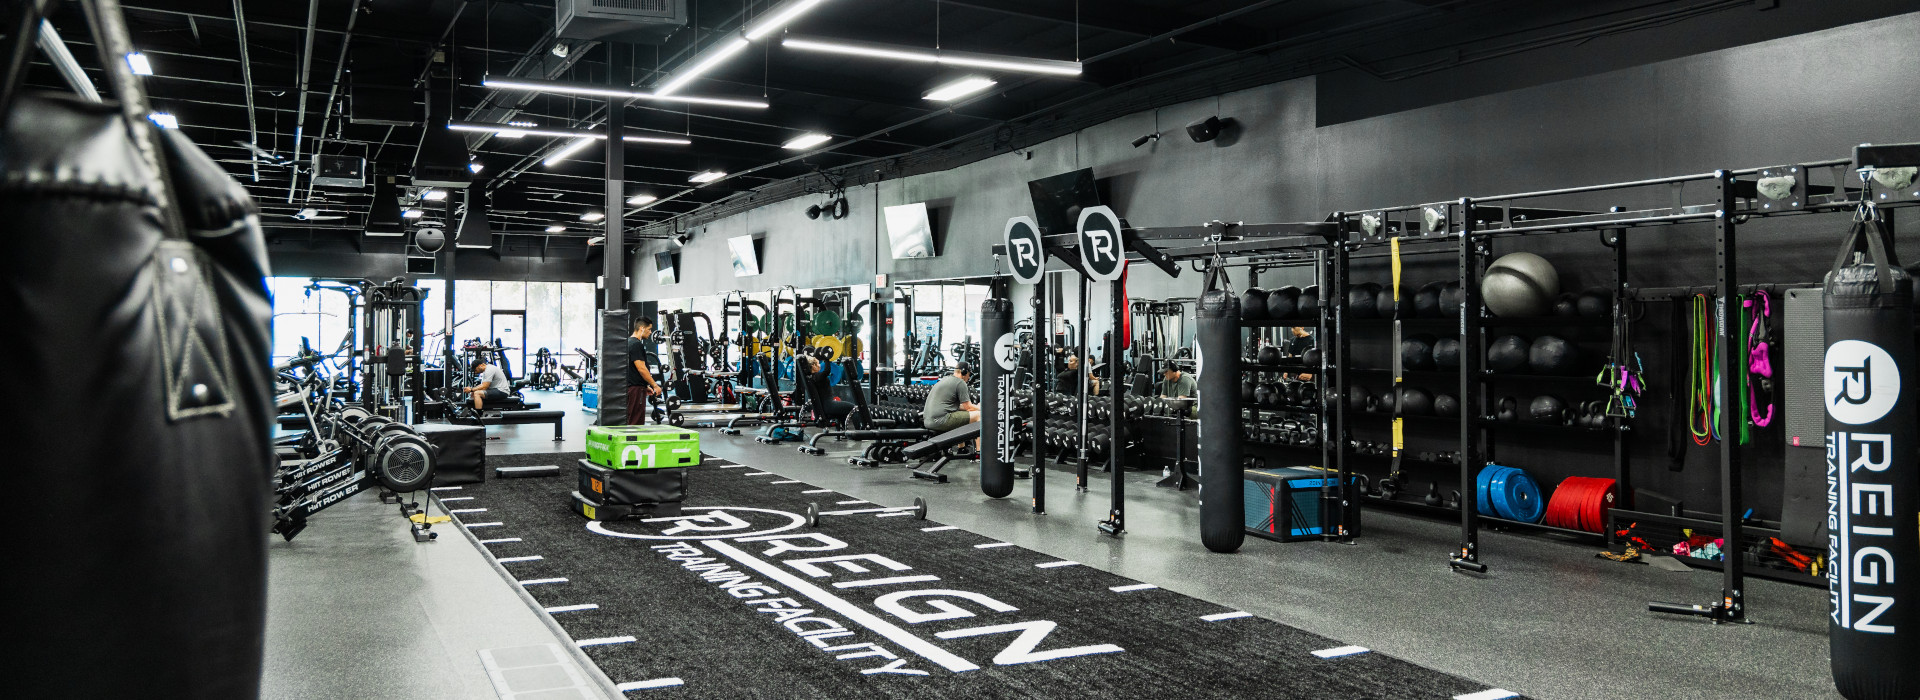 Top 5 Best Gyms To Join Near Corona, CA